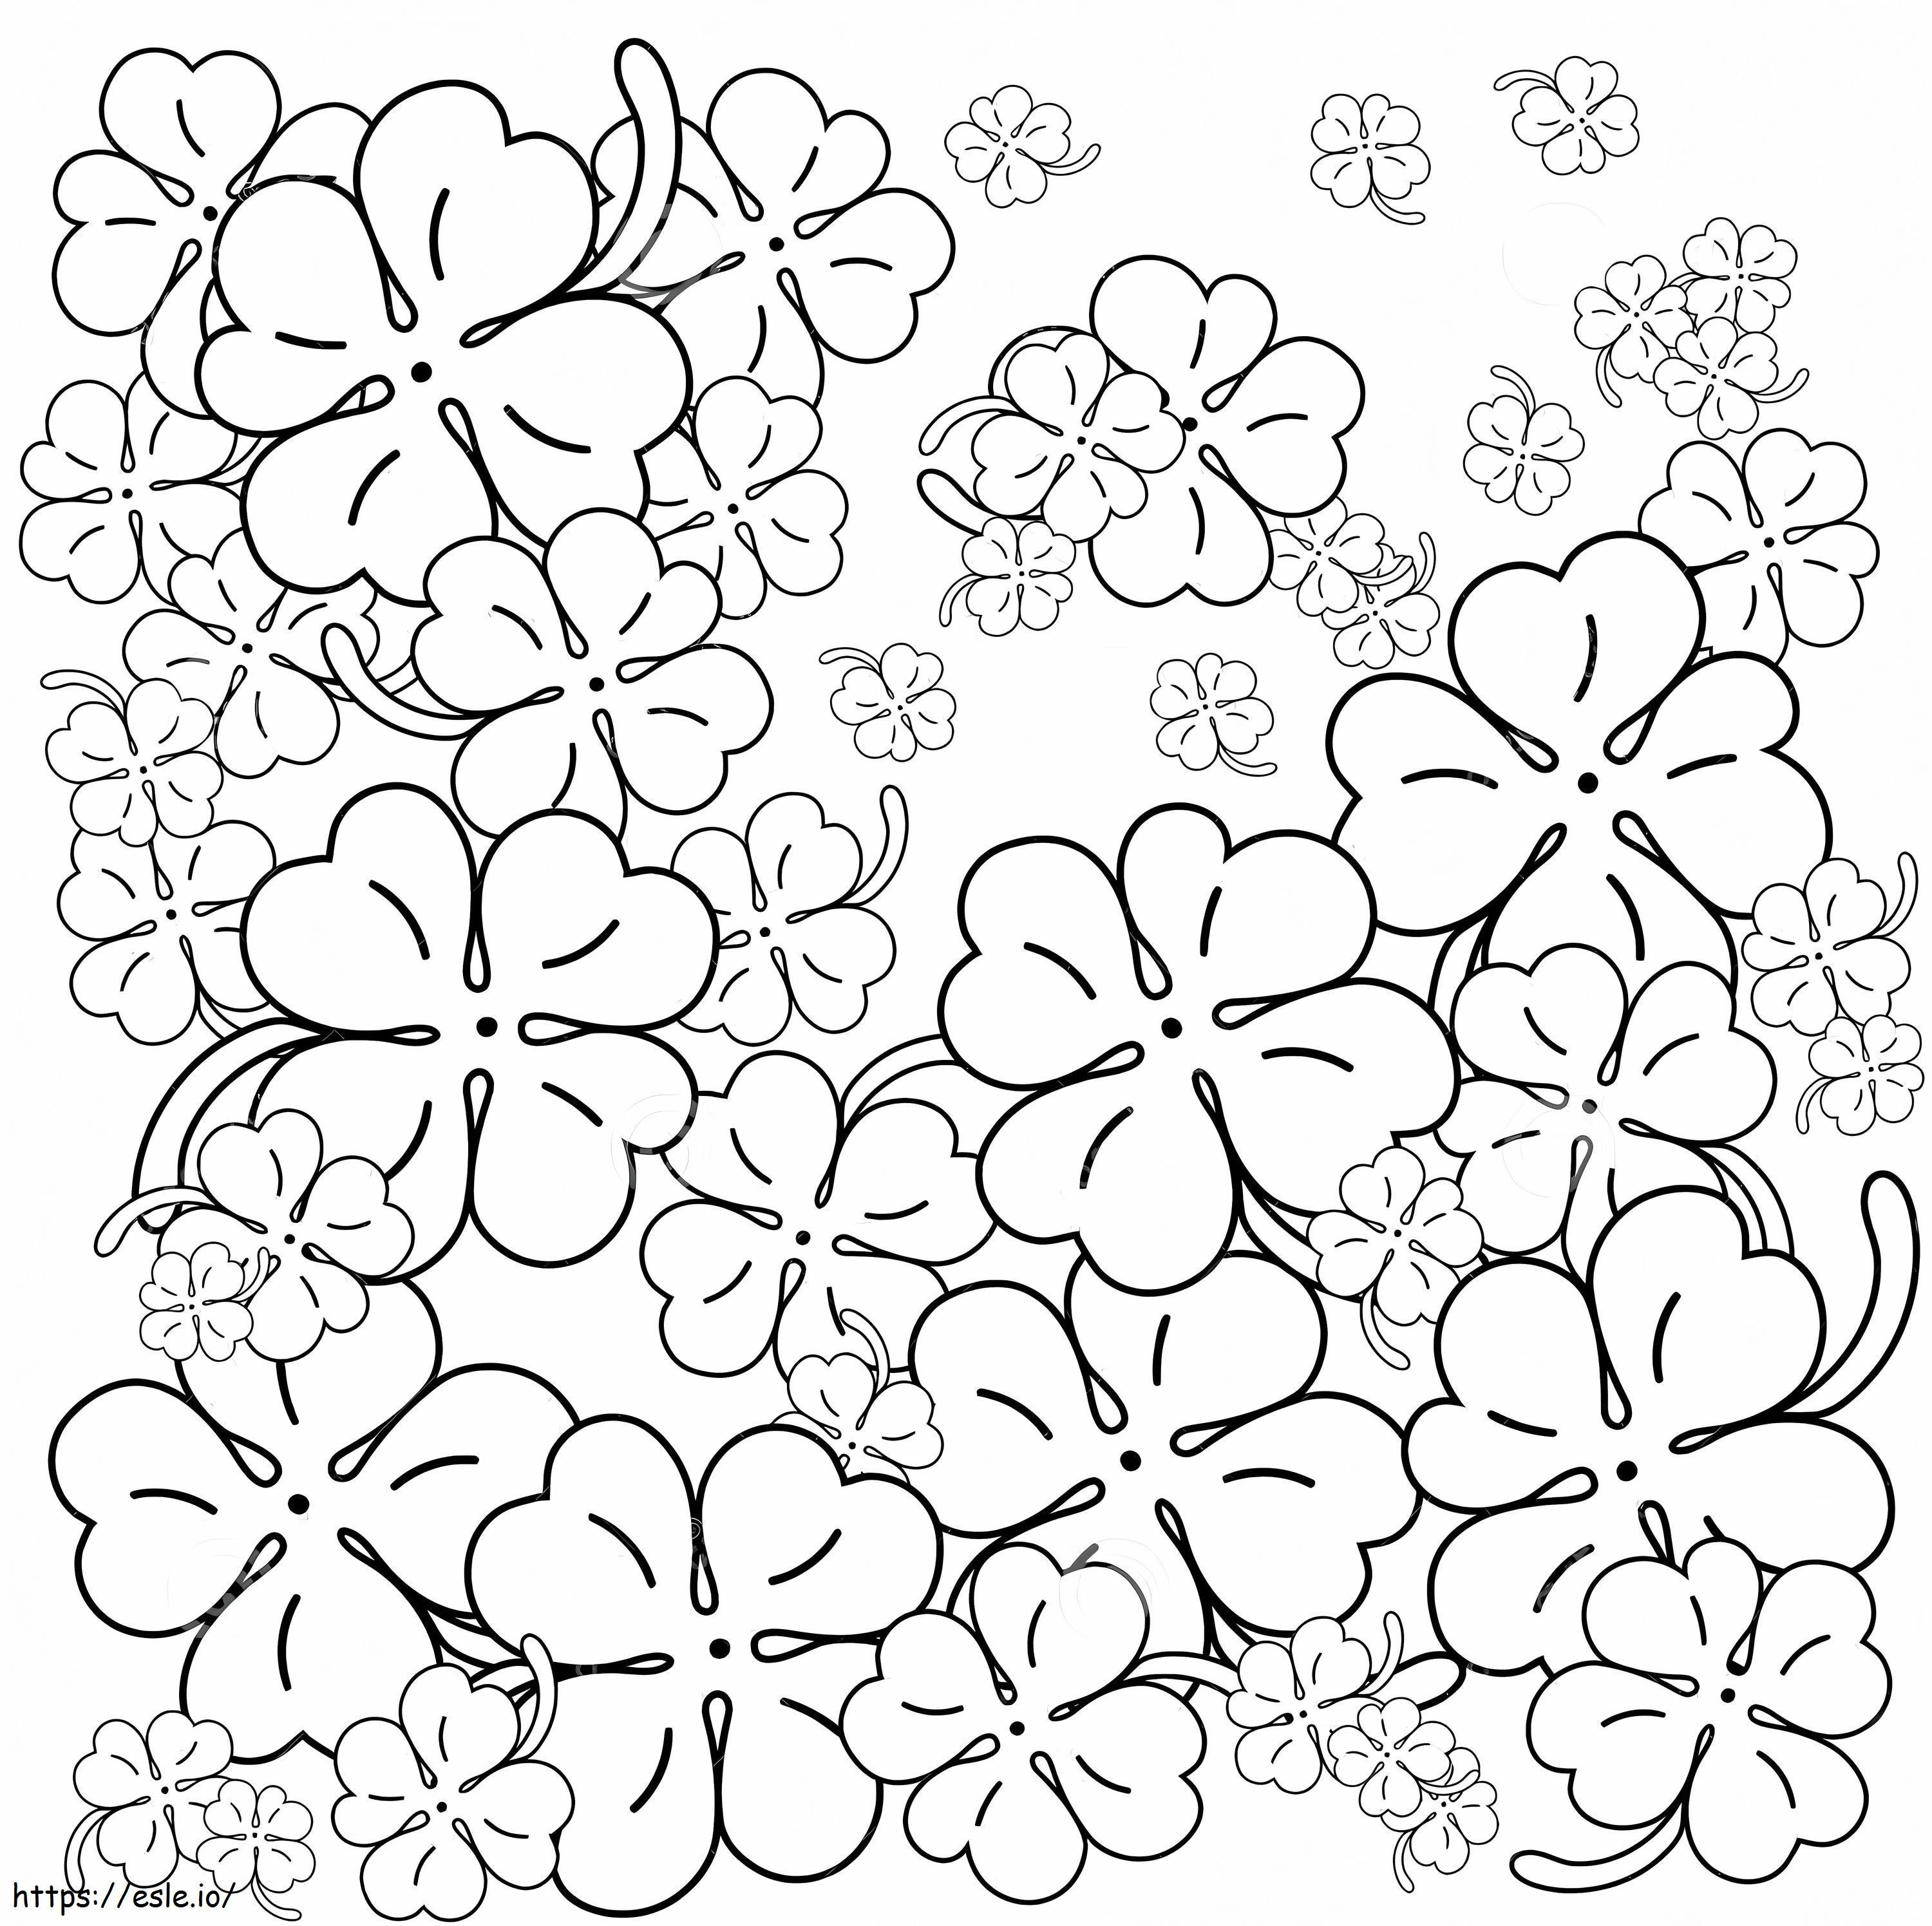 Adult Clover coloring page